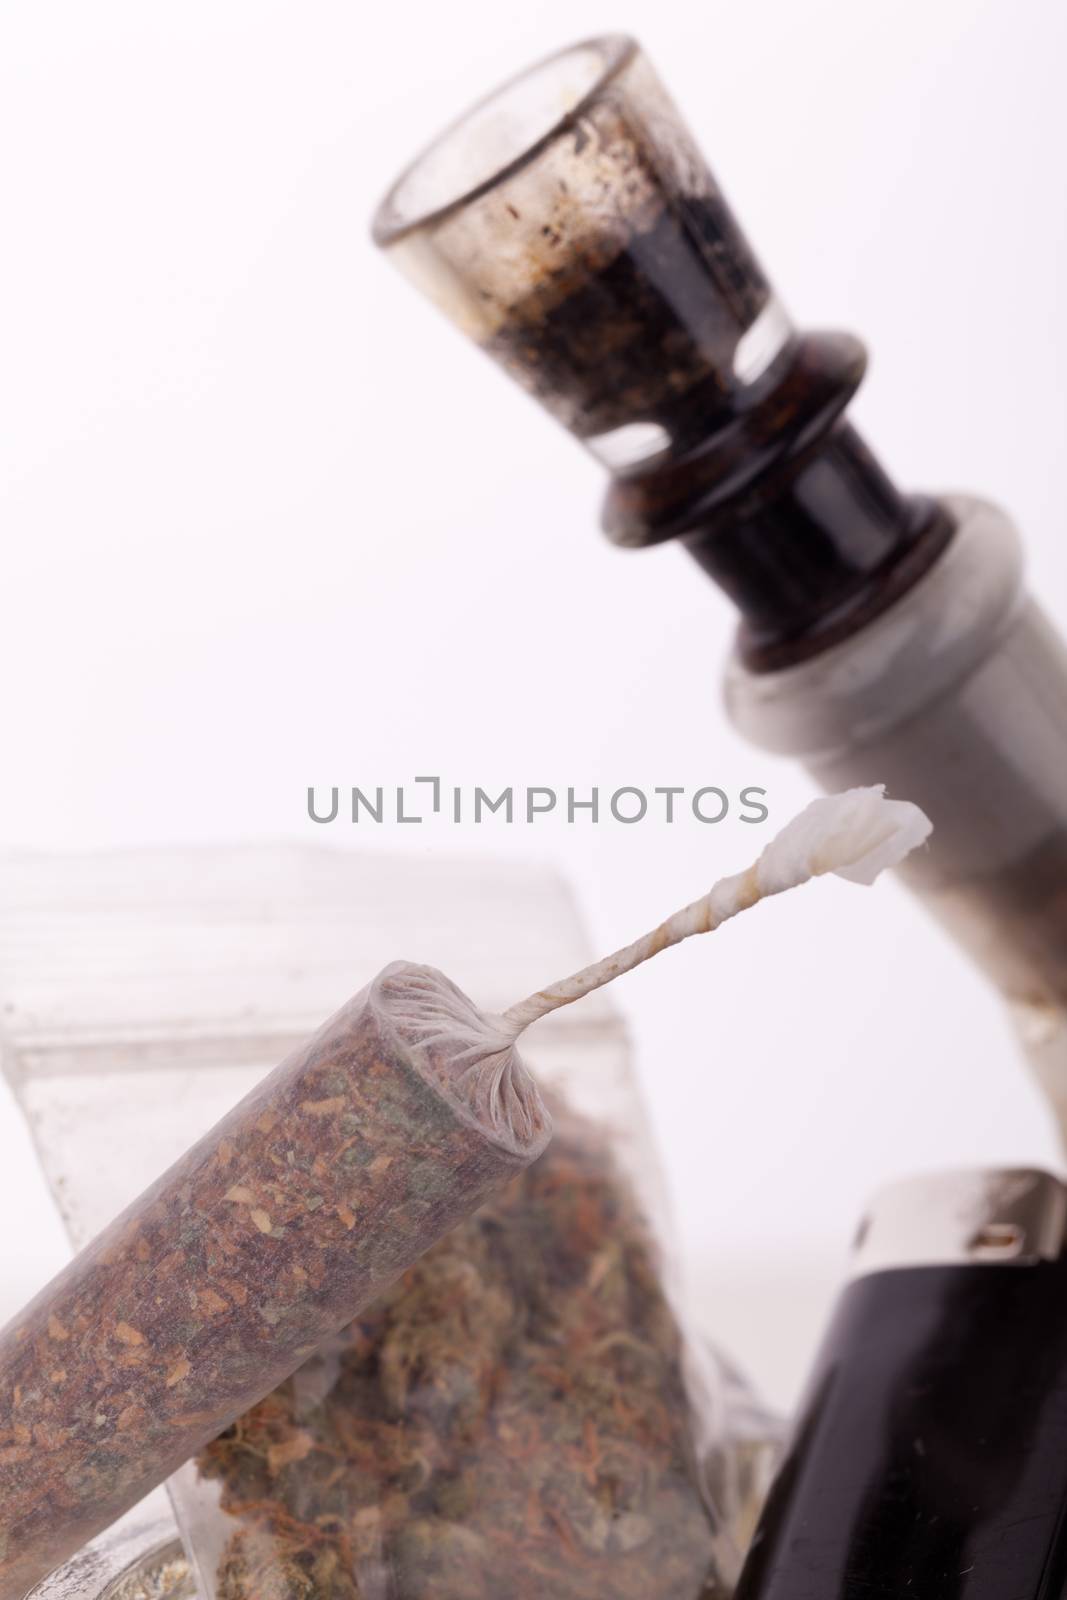 Close up of marijuana joint made with translucent rolling papers, plastic baggy of dried marijuana, black lighter and pipe on white background